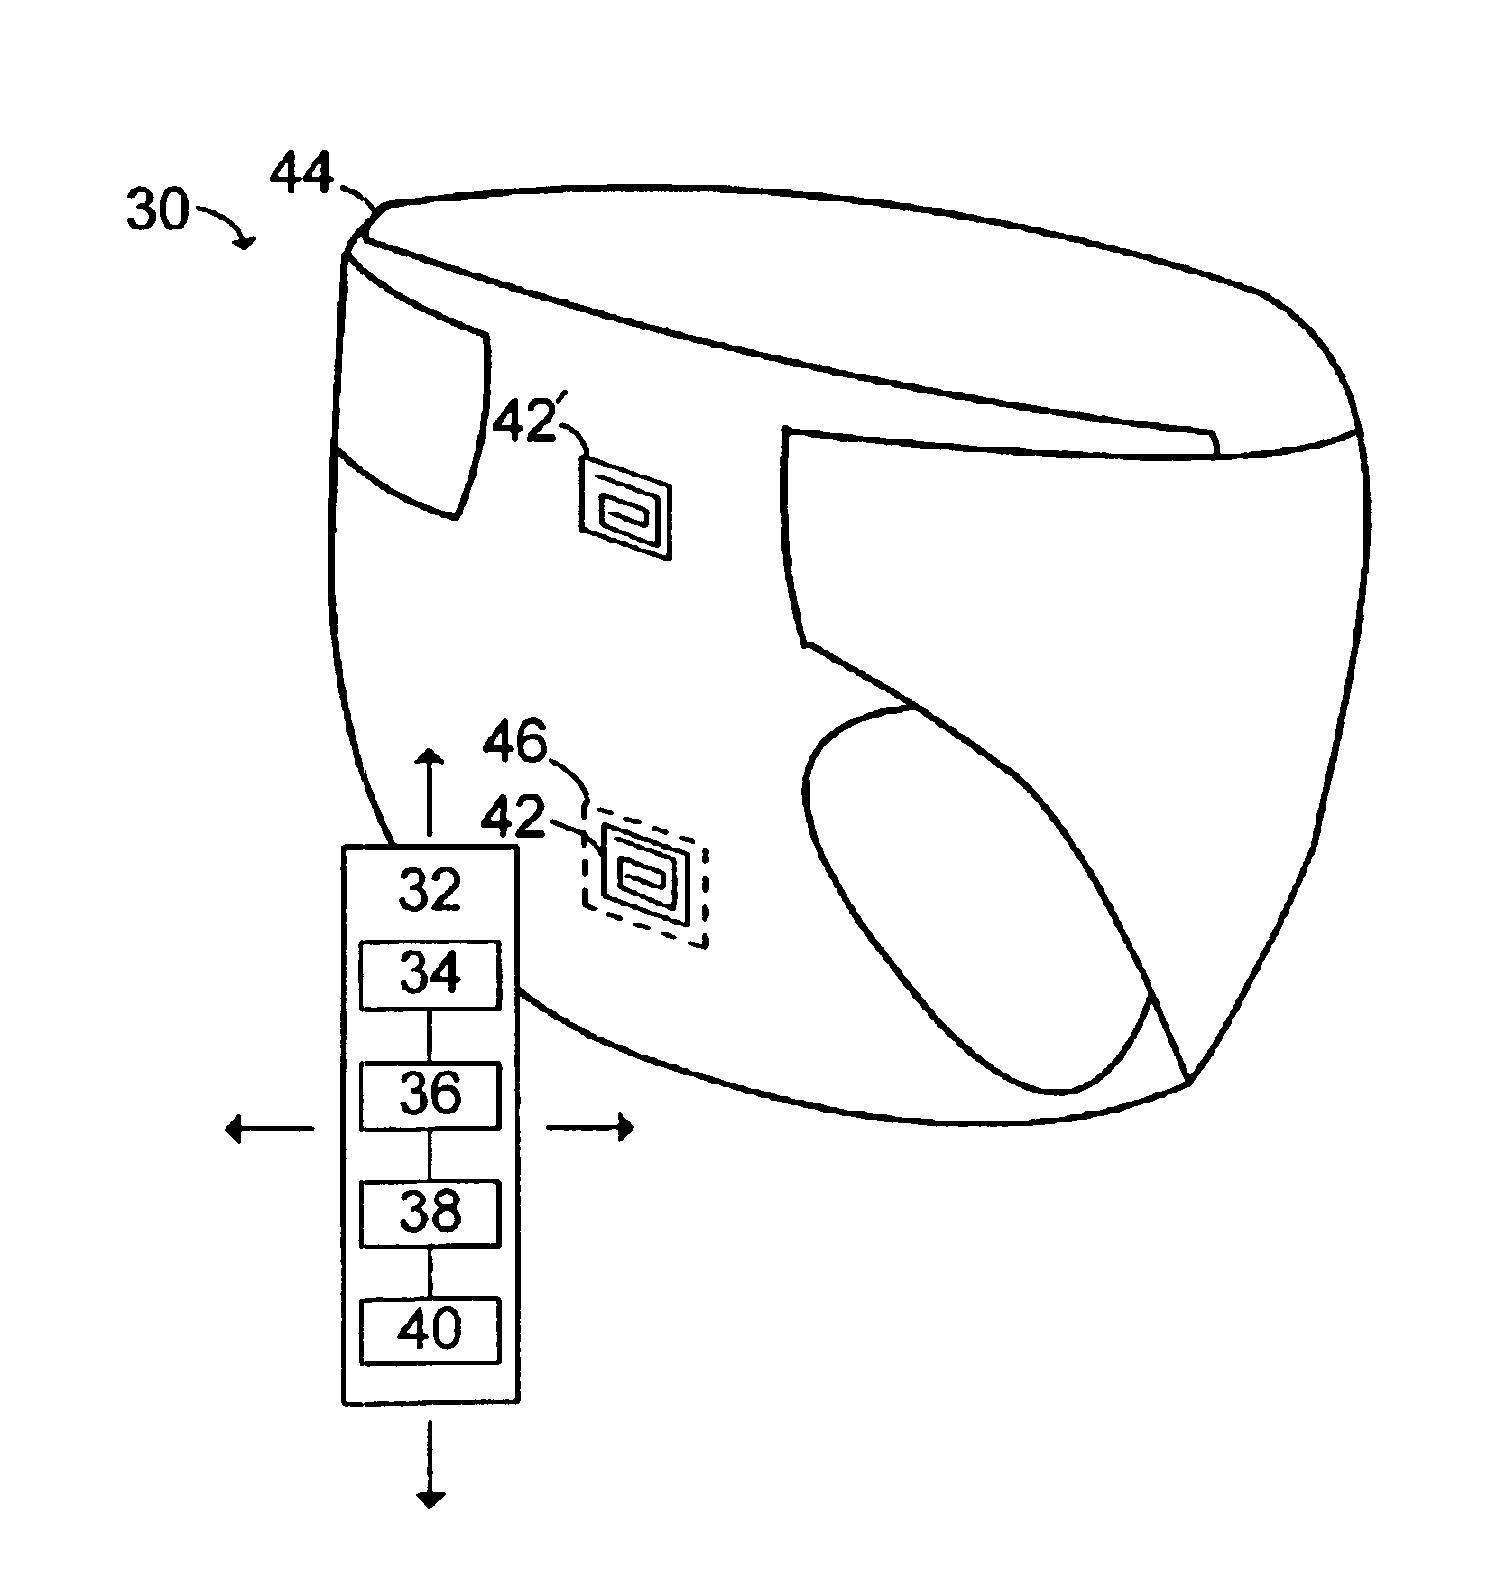 Urine detection system and method